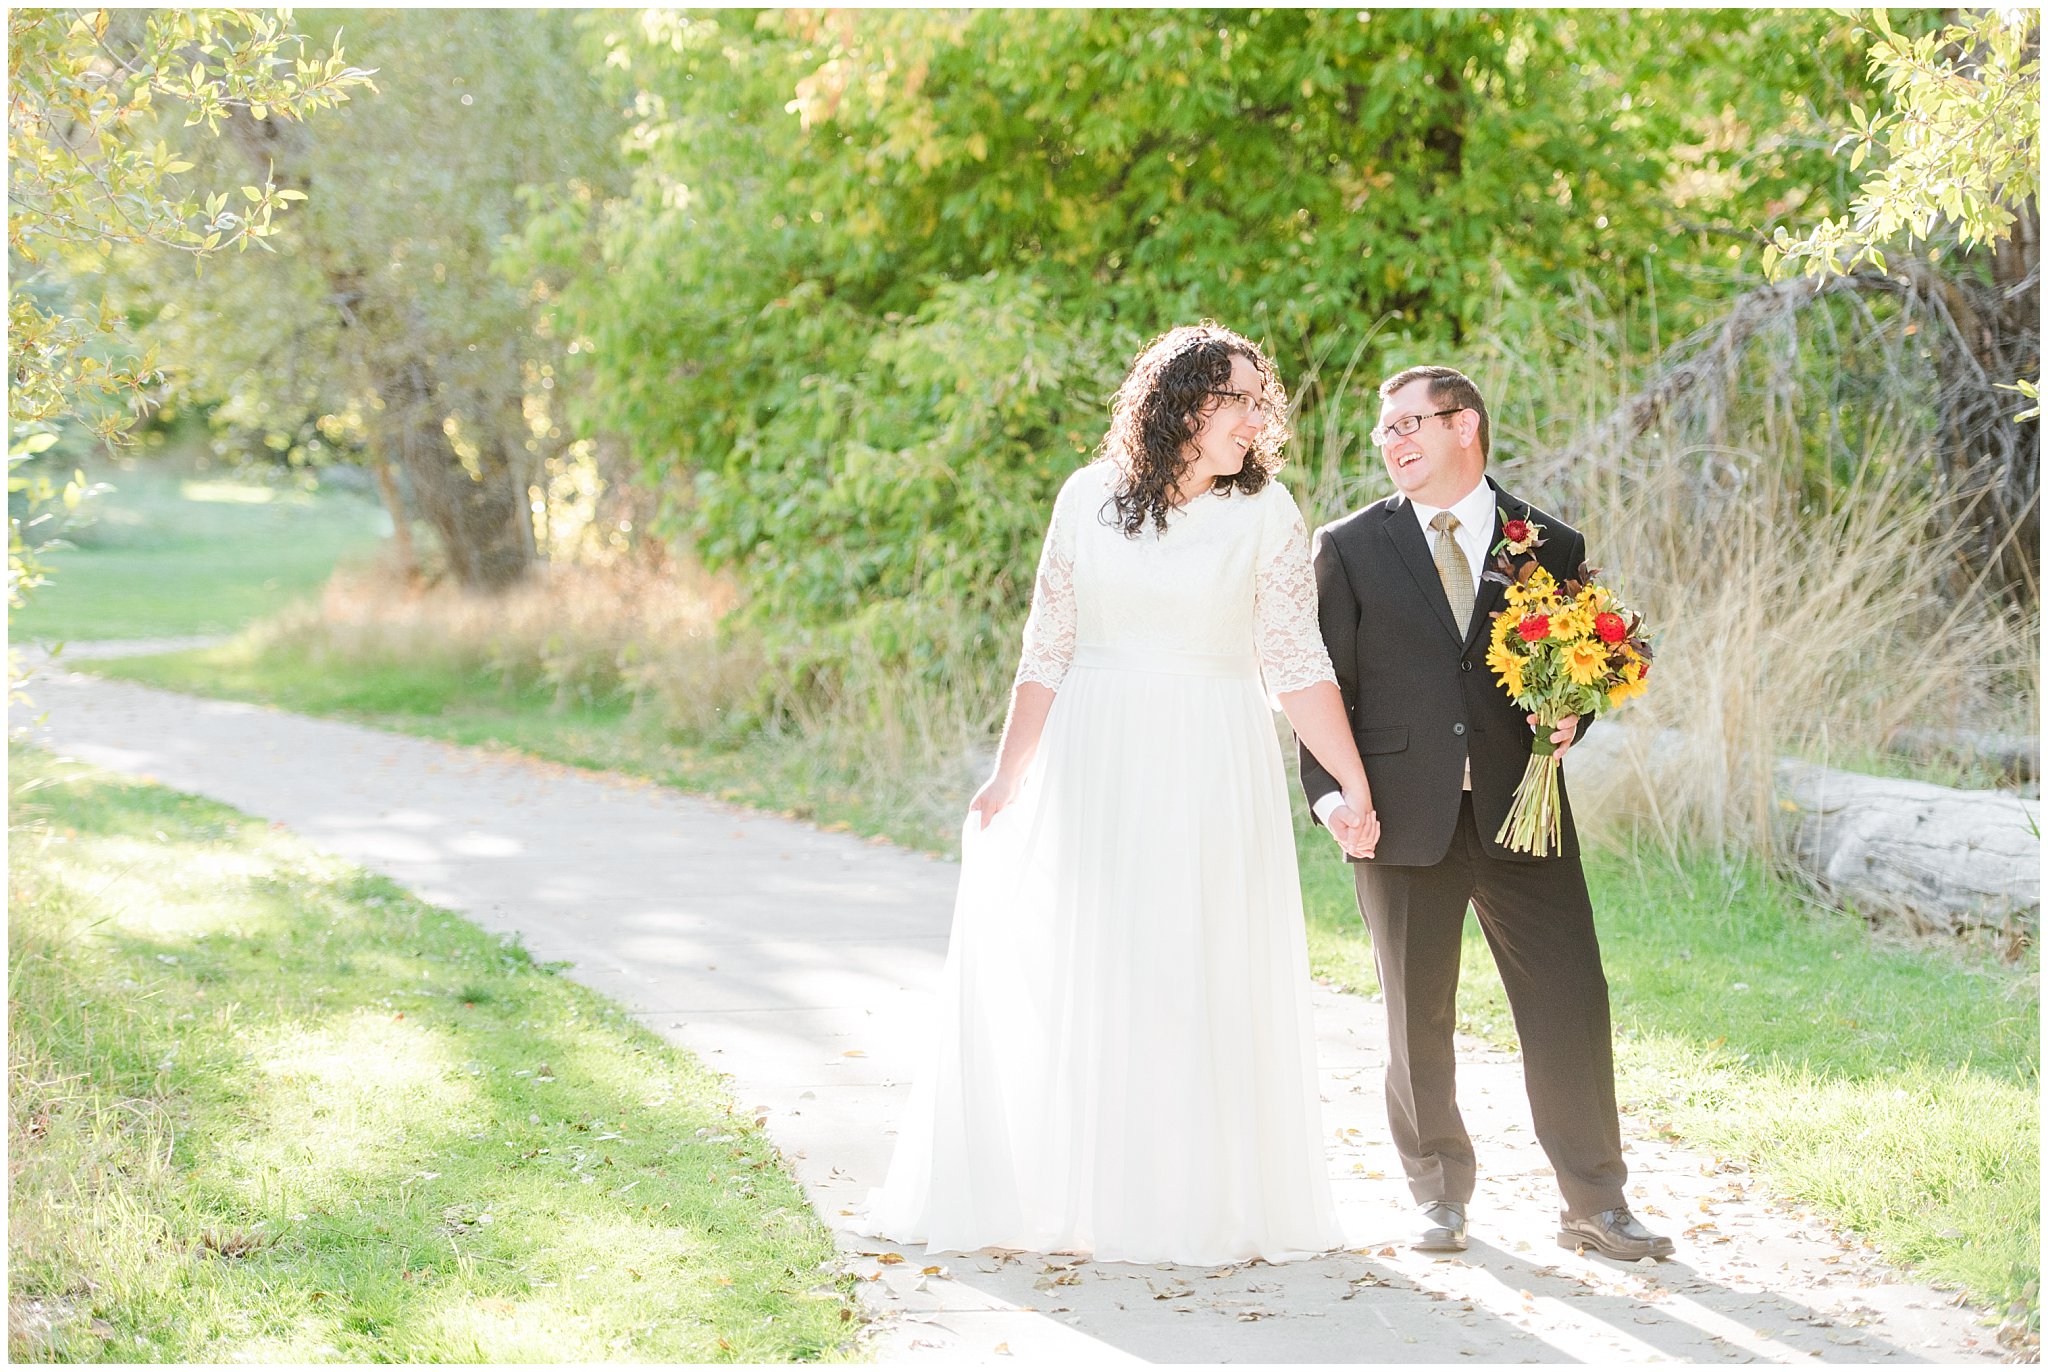 Groom in black suit and gold tie, bride in simple lace sleeve wedding dress with fall bouquet at Denzil Stewart Nature Park | Logan Temple Fall Formal Session | Jessie and Dallin Photography